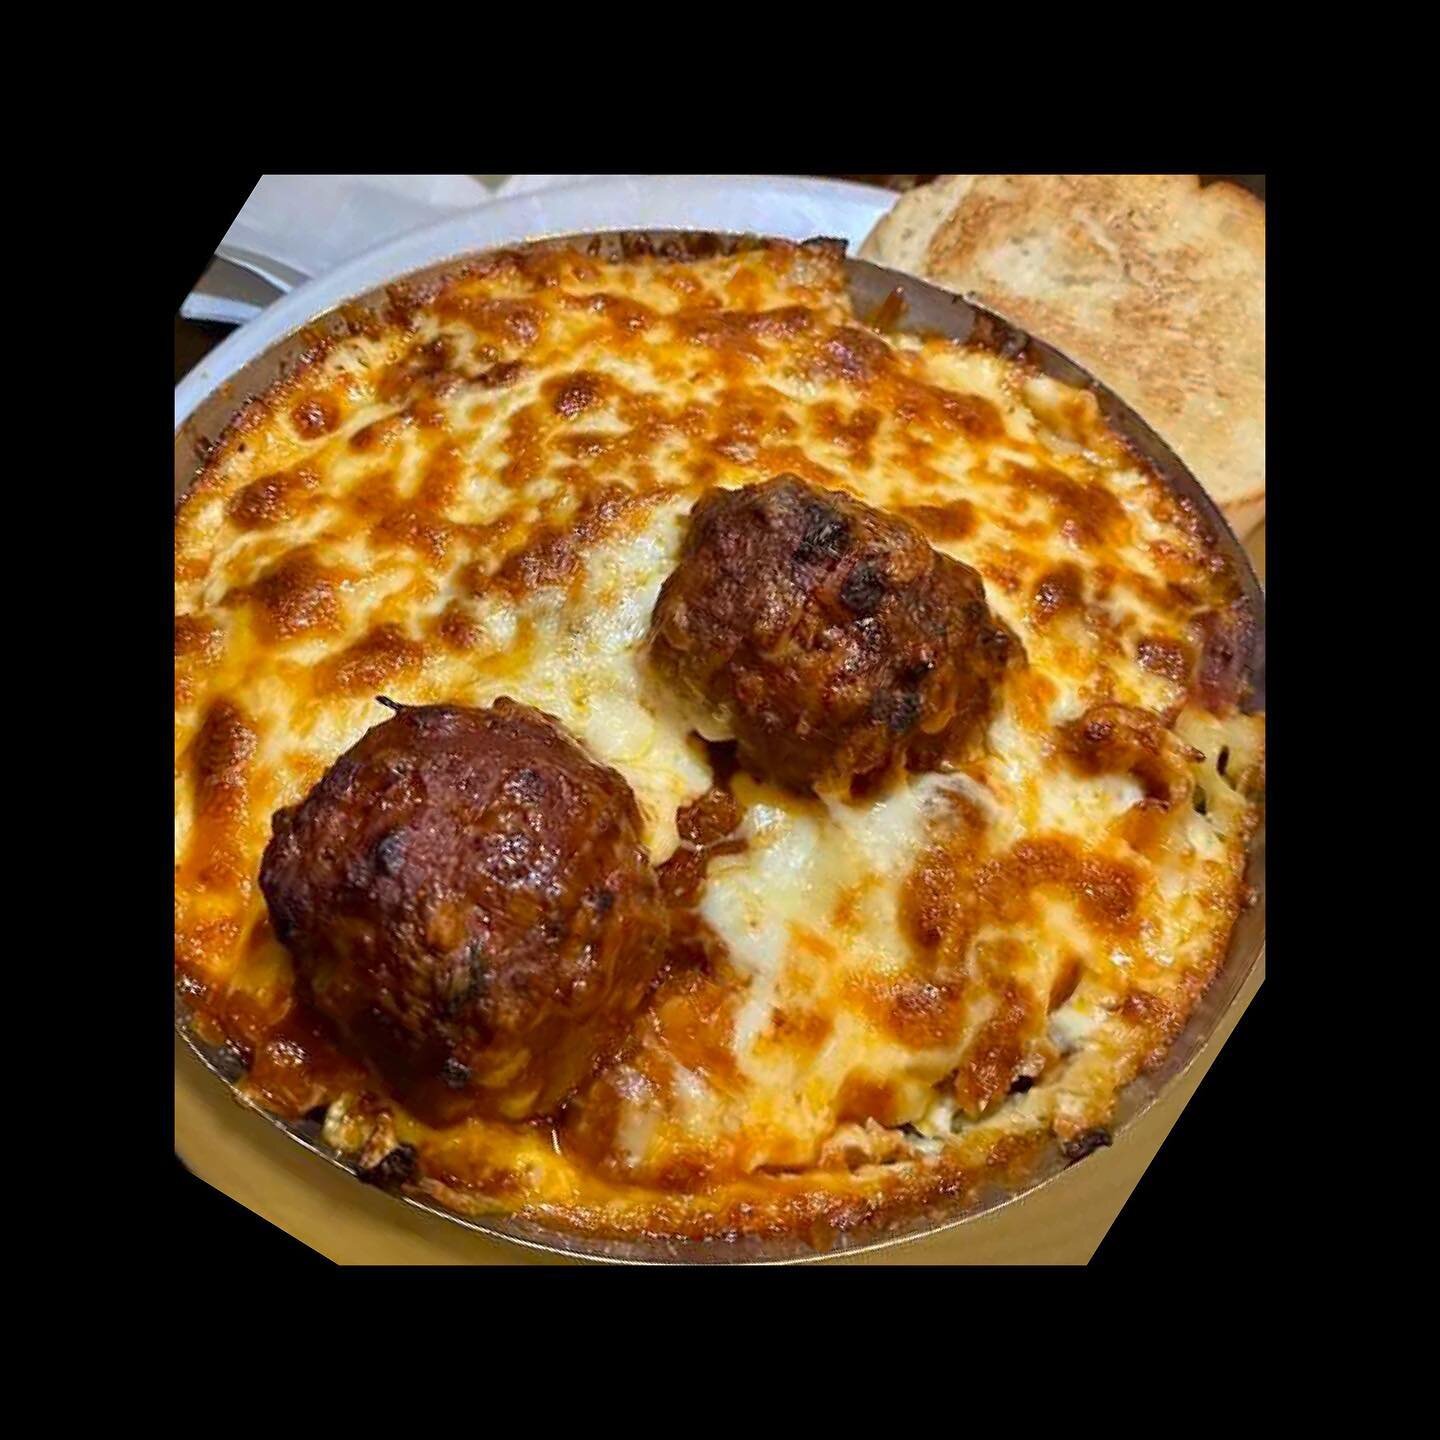 🎶 ON TOP OF SPAGHETTI ALL COVERED IN CHEESE&hellip; ! 🎵 🧀🍝 

Have you added meatballs to your pasta? We recommend adding them to spaghetti or one of our baked pastas! Filling, handmade by our mama, and delicious! 

OPEN DAILY FOR 
DINE-IN/TAKEOUT